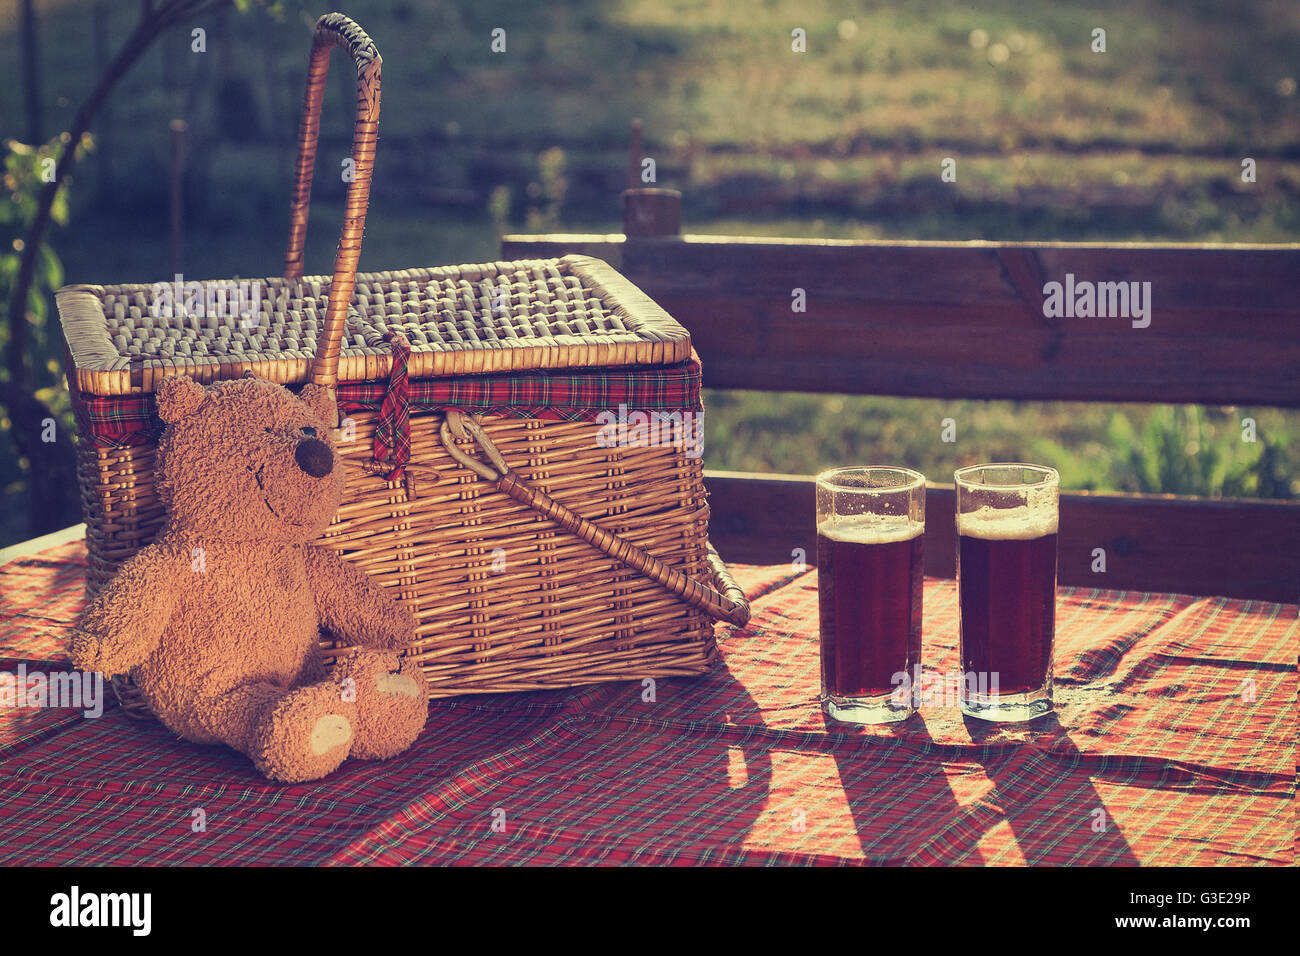 Picnic basket on the grass Stock Photo